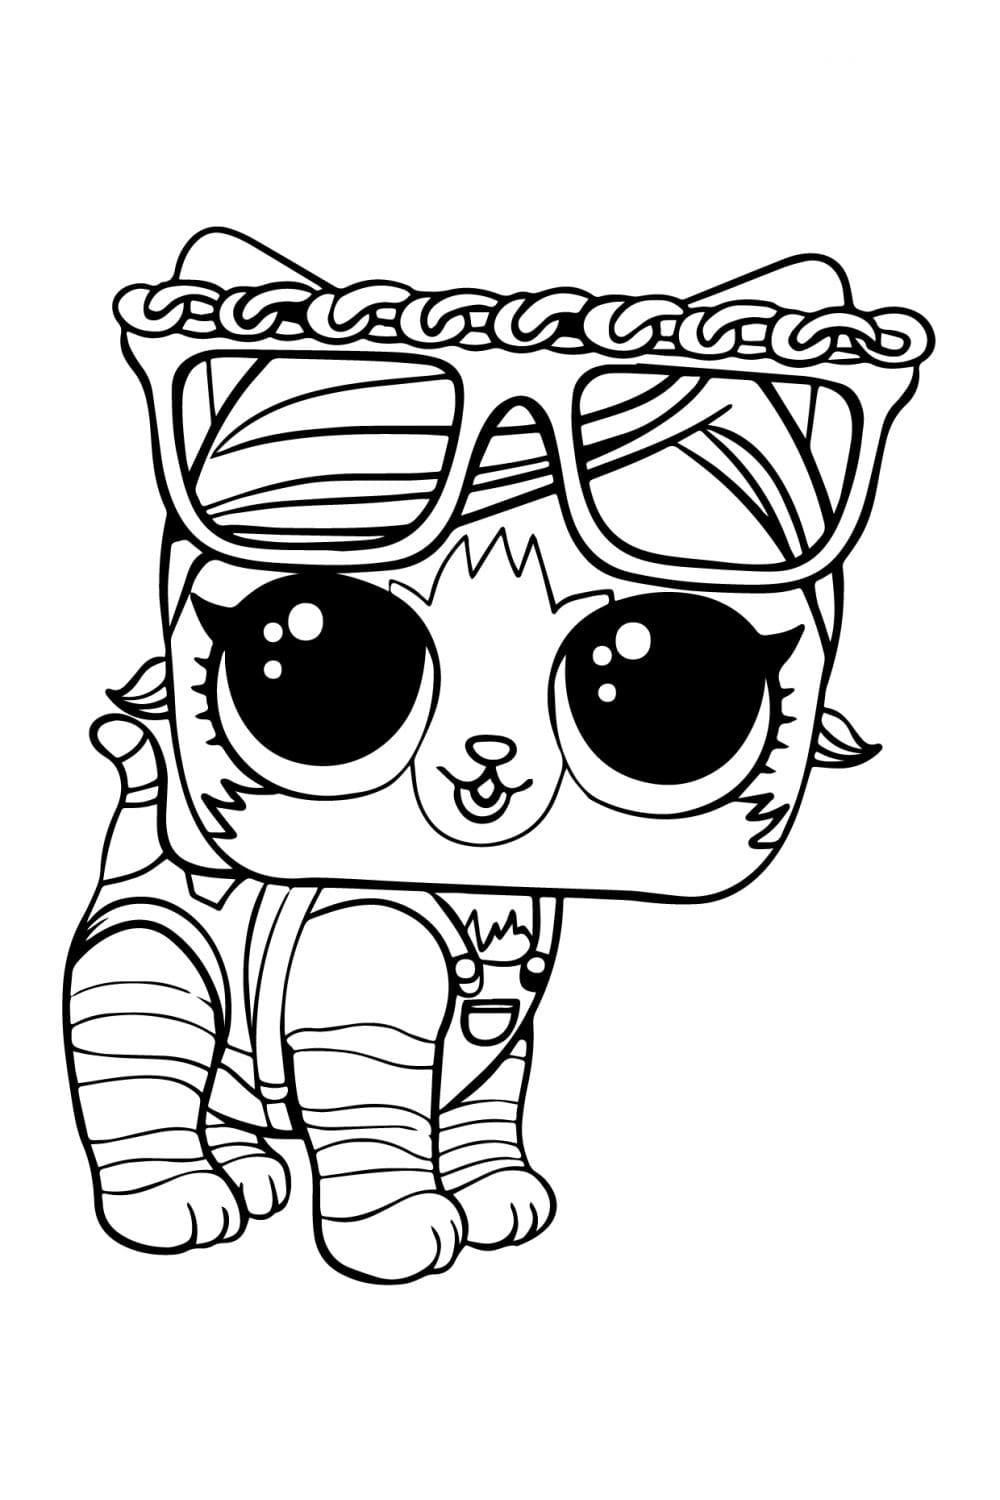 Lol Pets Kitten Coloring Page Free Printable Coloring Pages For Kids